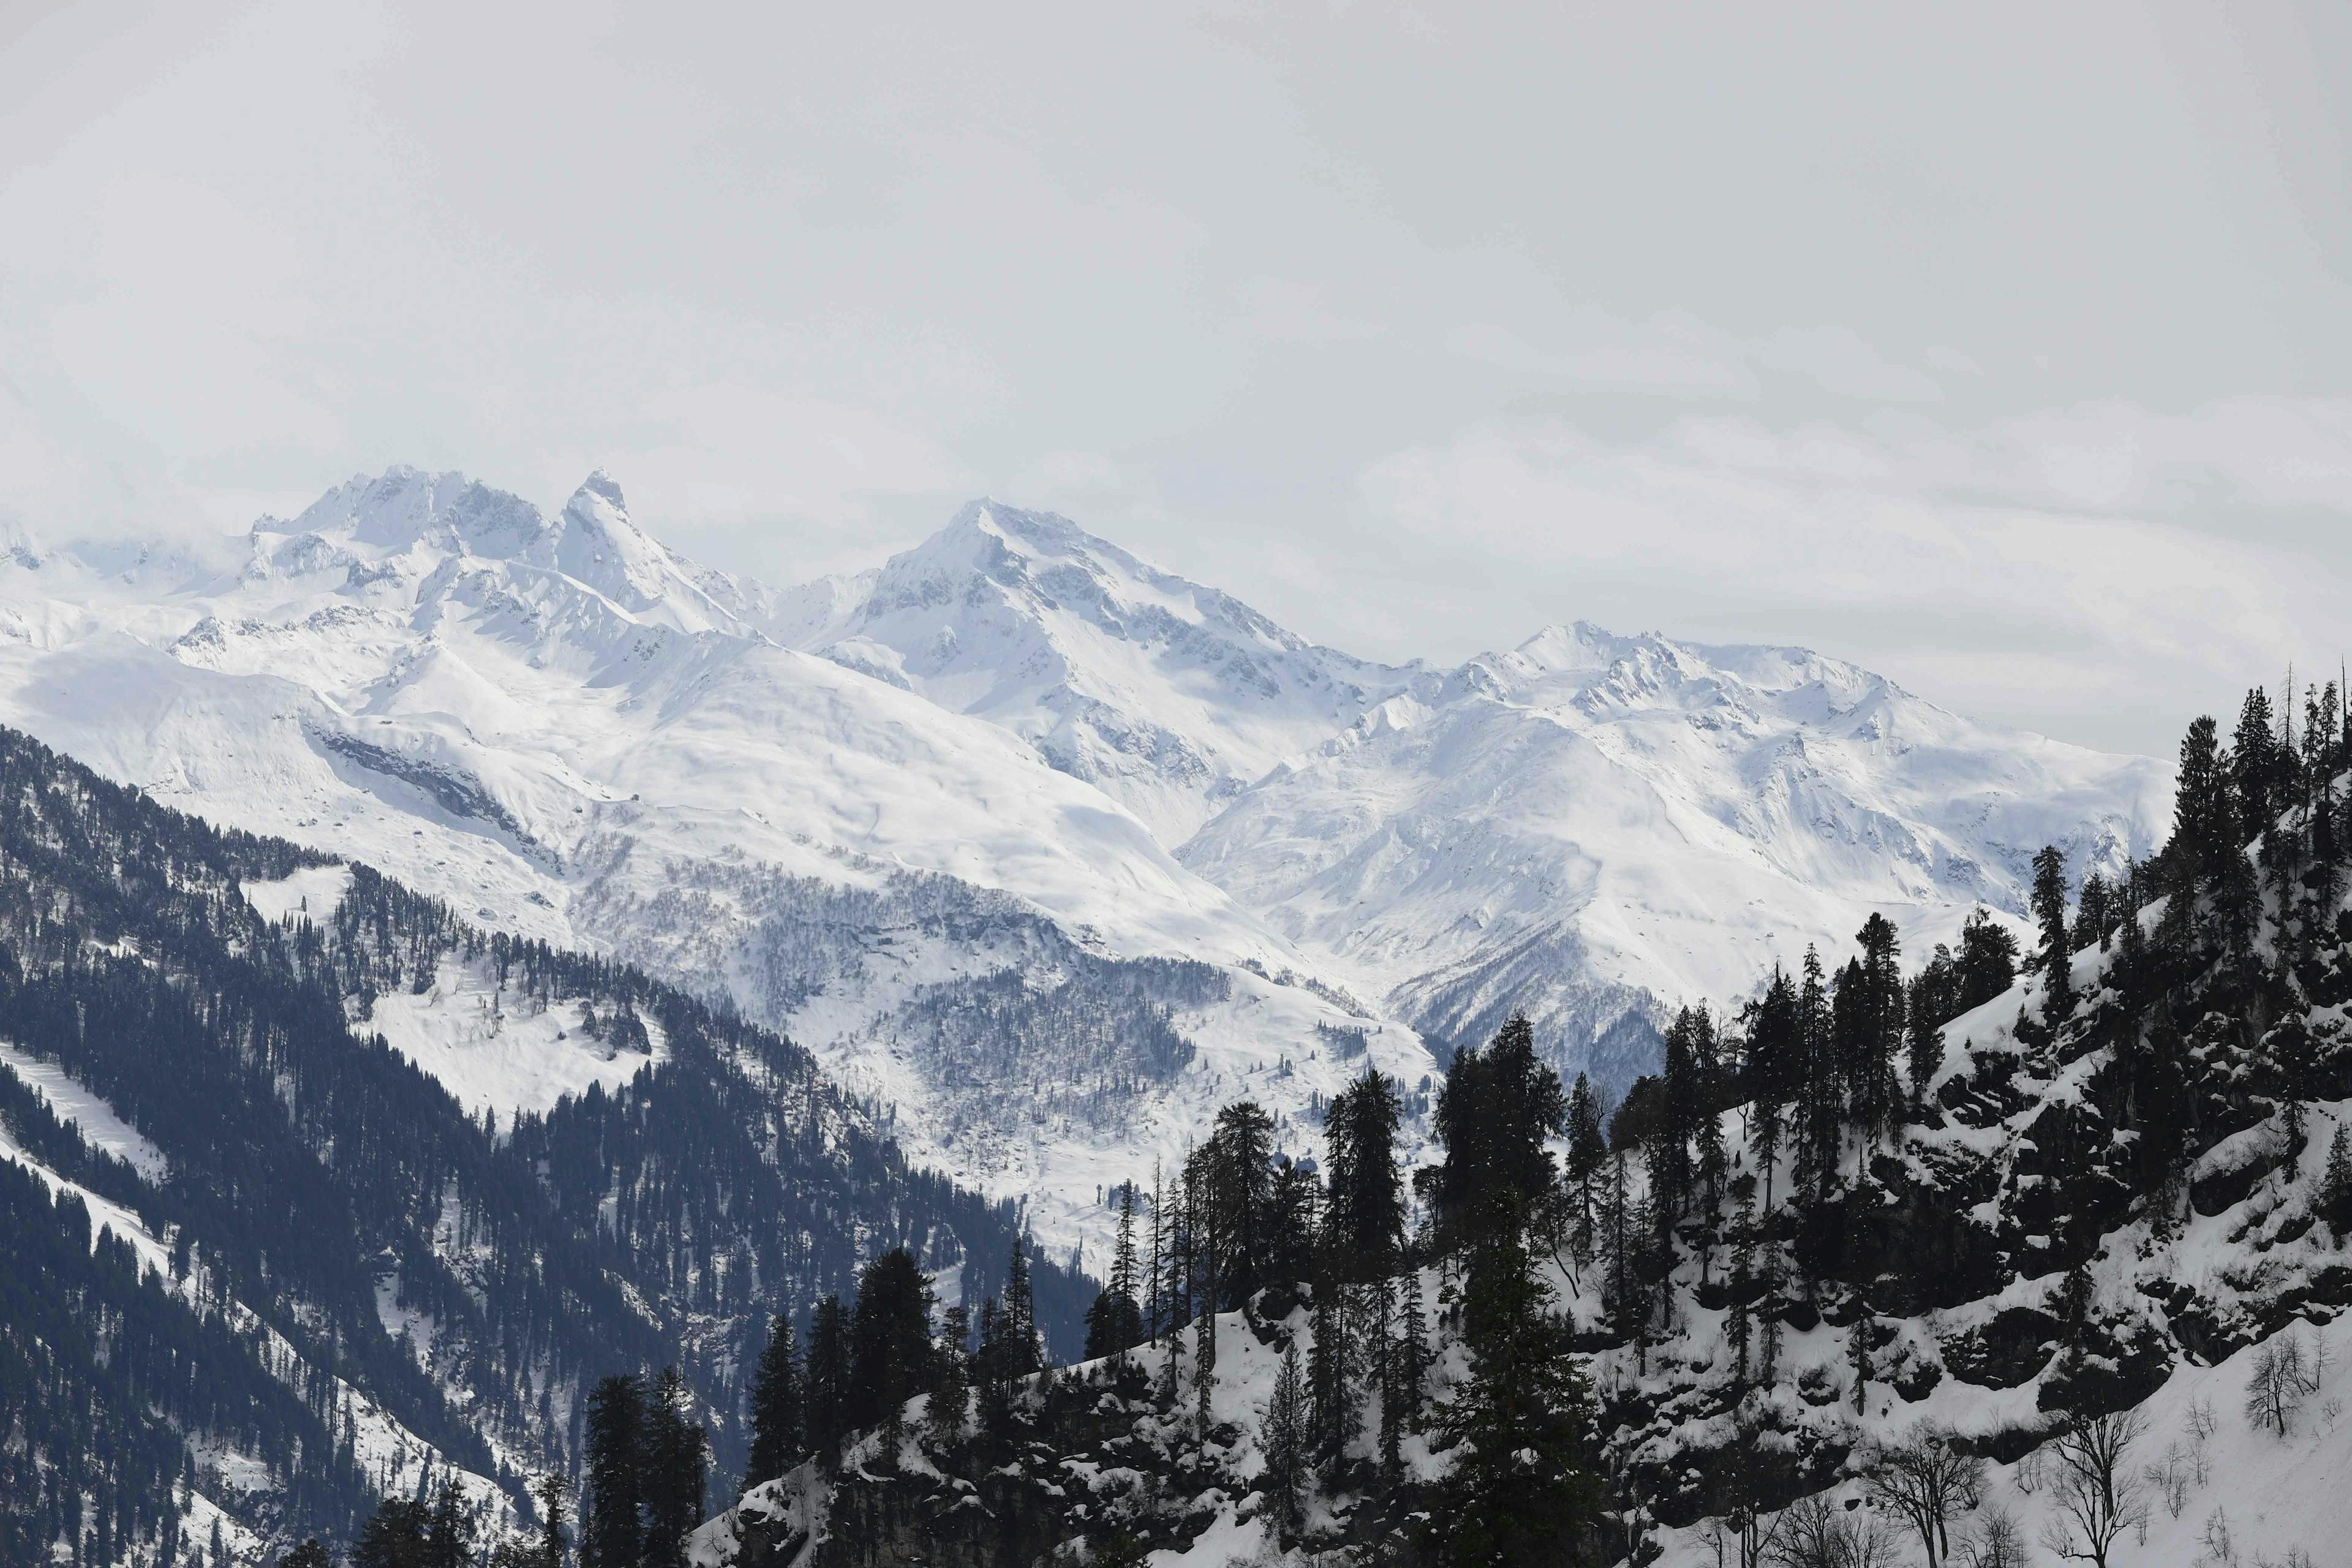 Manali Backpacking Adventure: Scenic Beauty of Snow-Capped Peaks